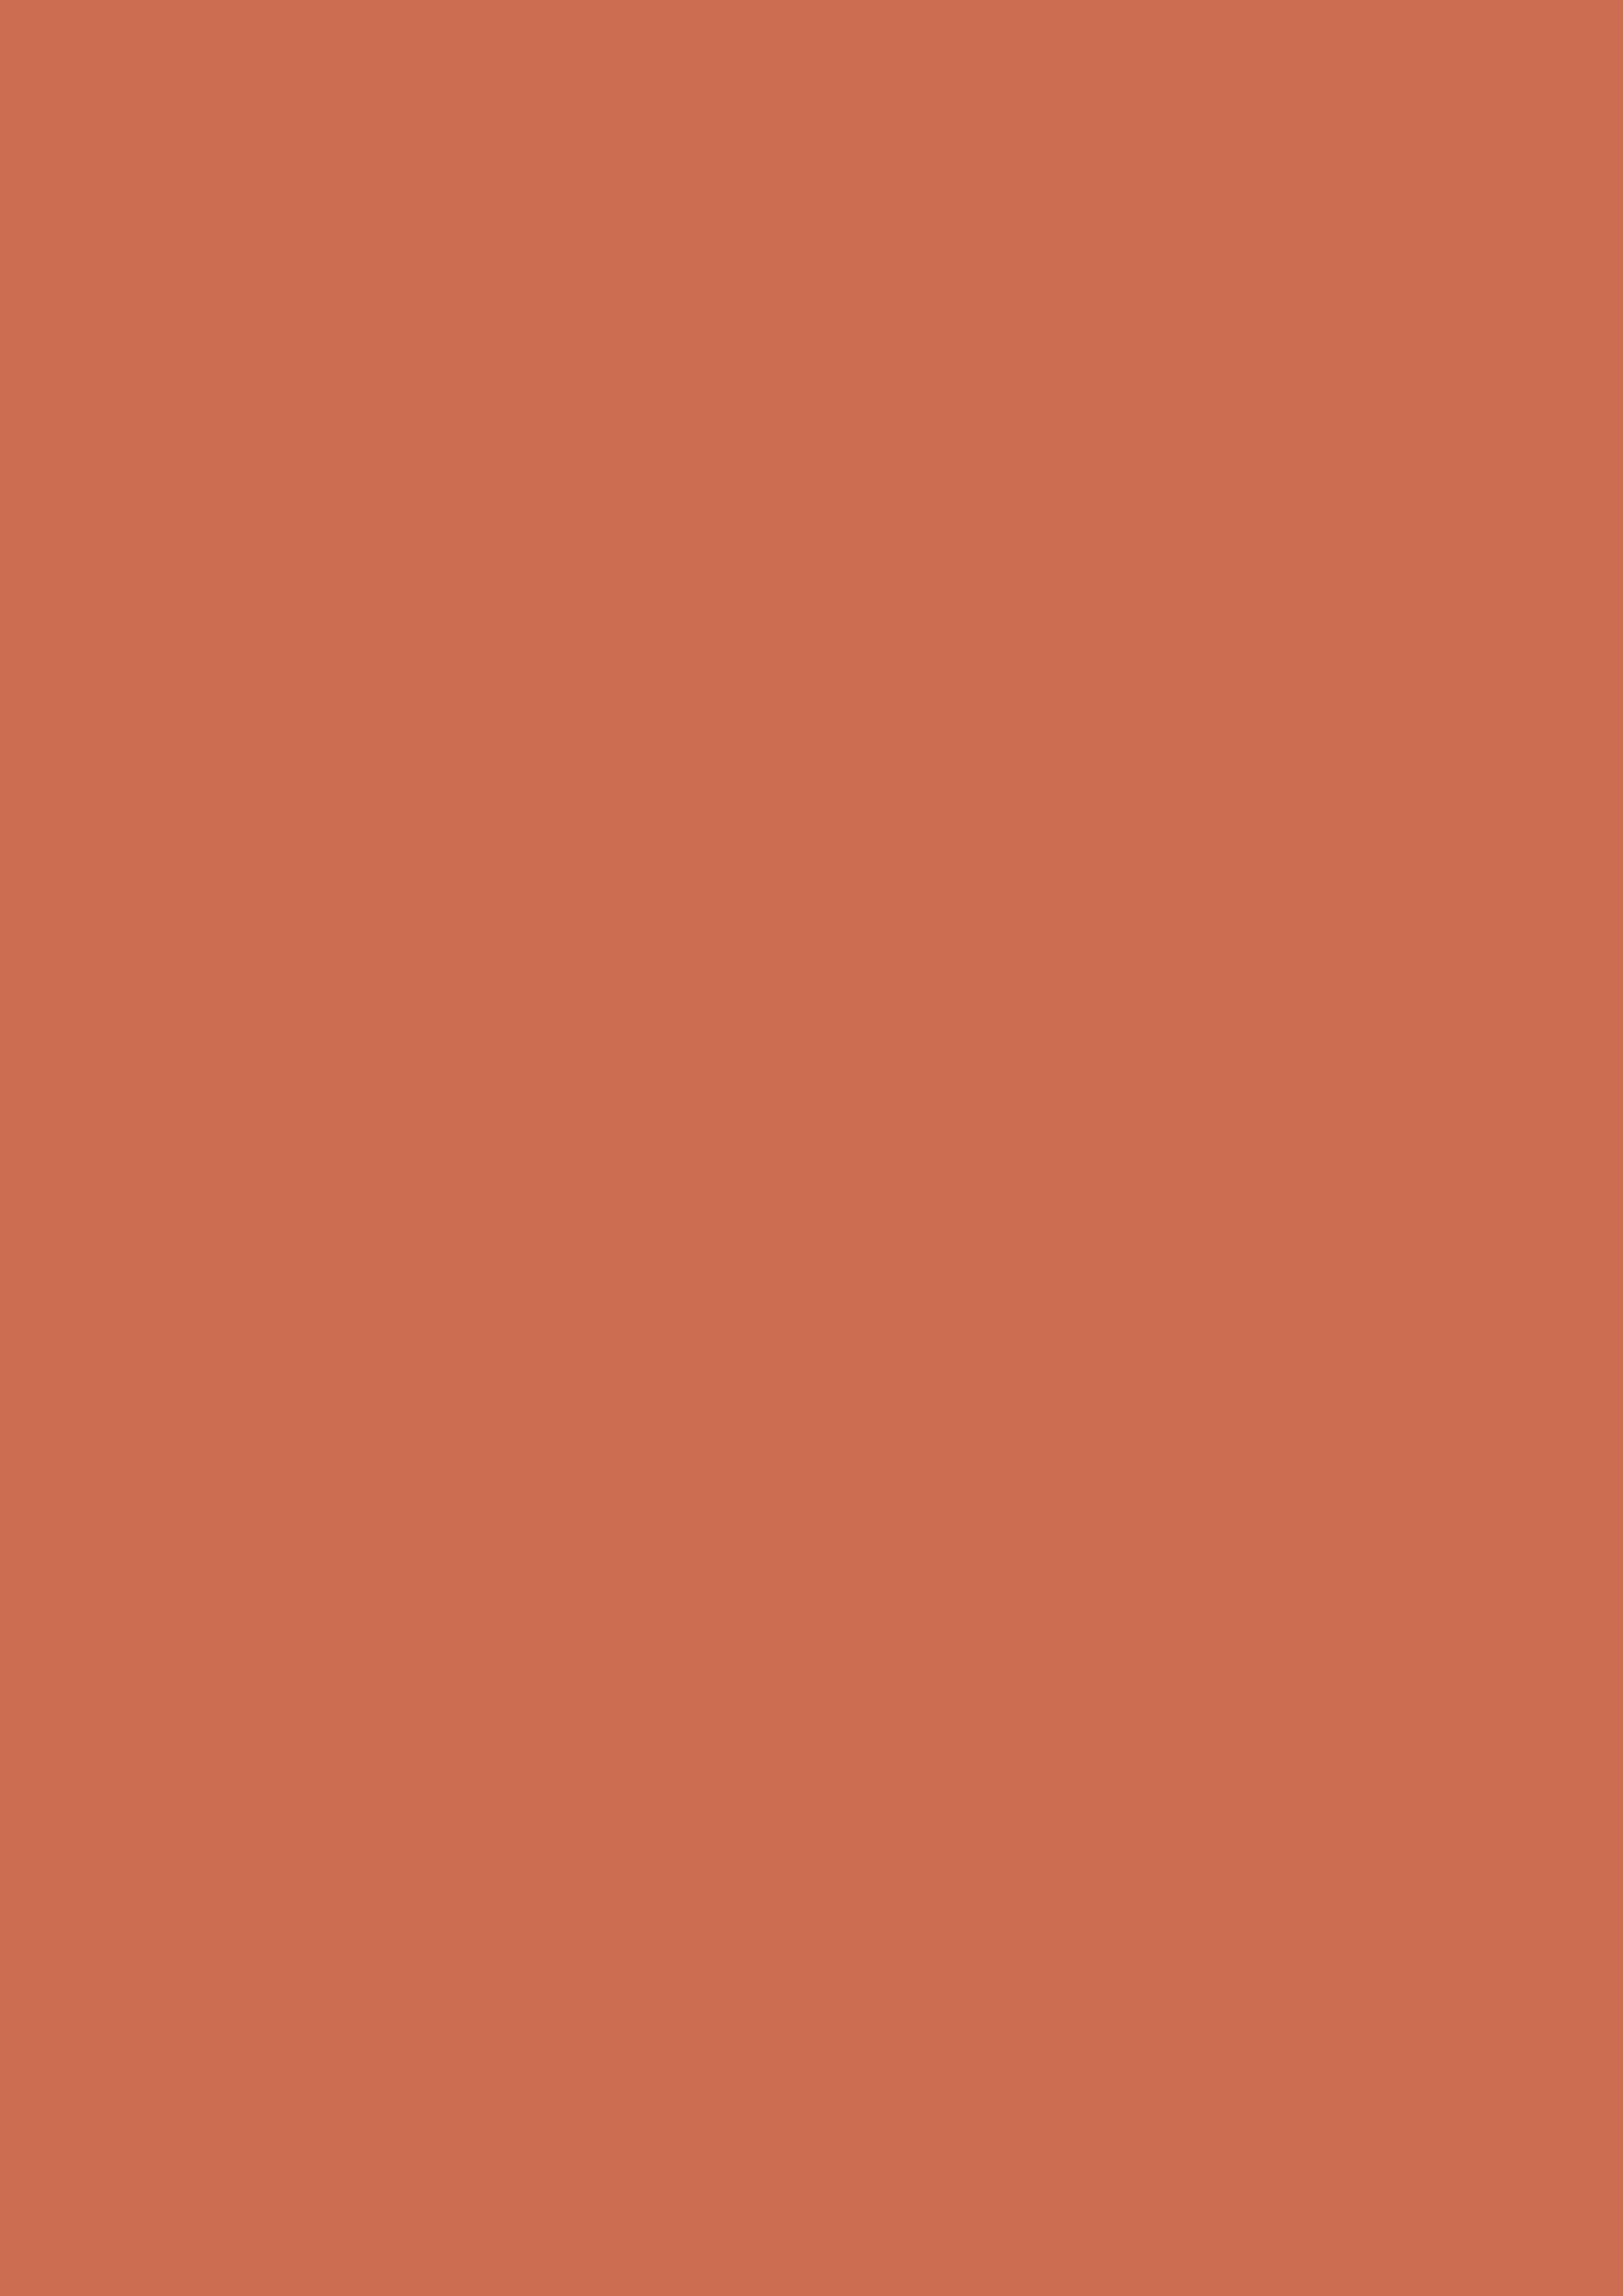 2480x3508 Copper Red Solid Color Background